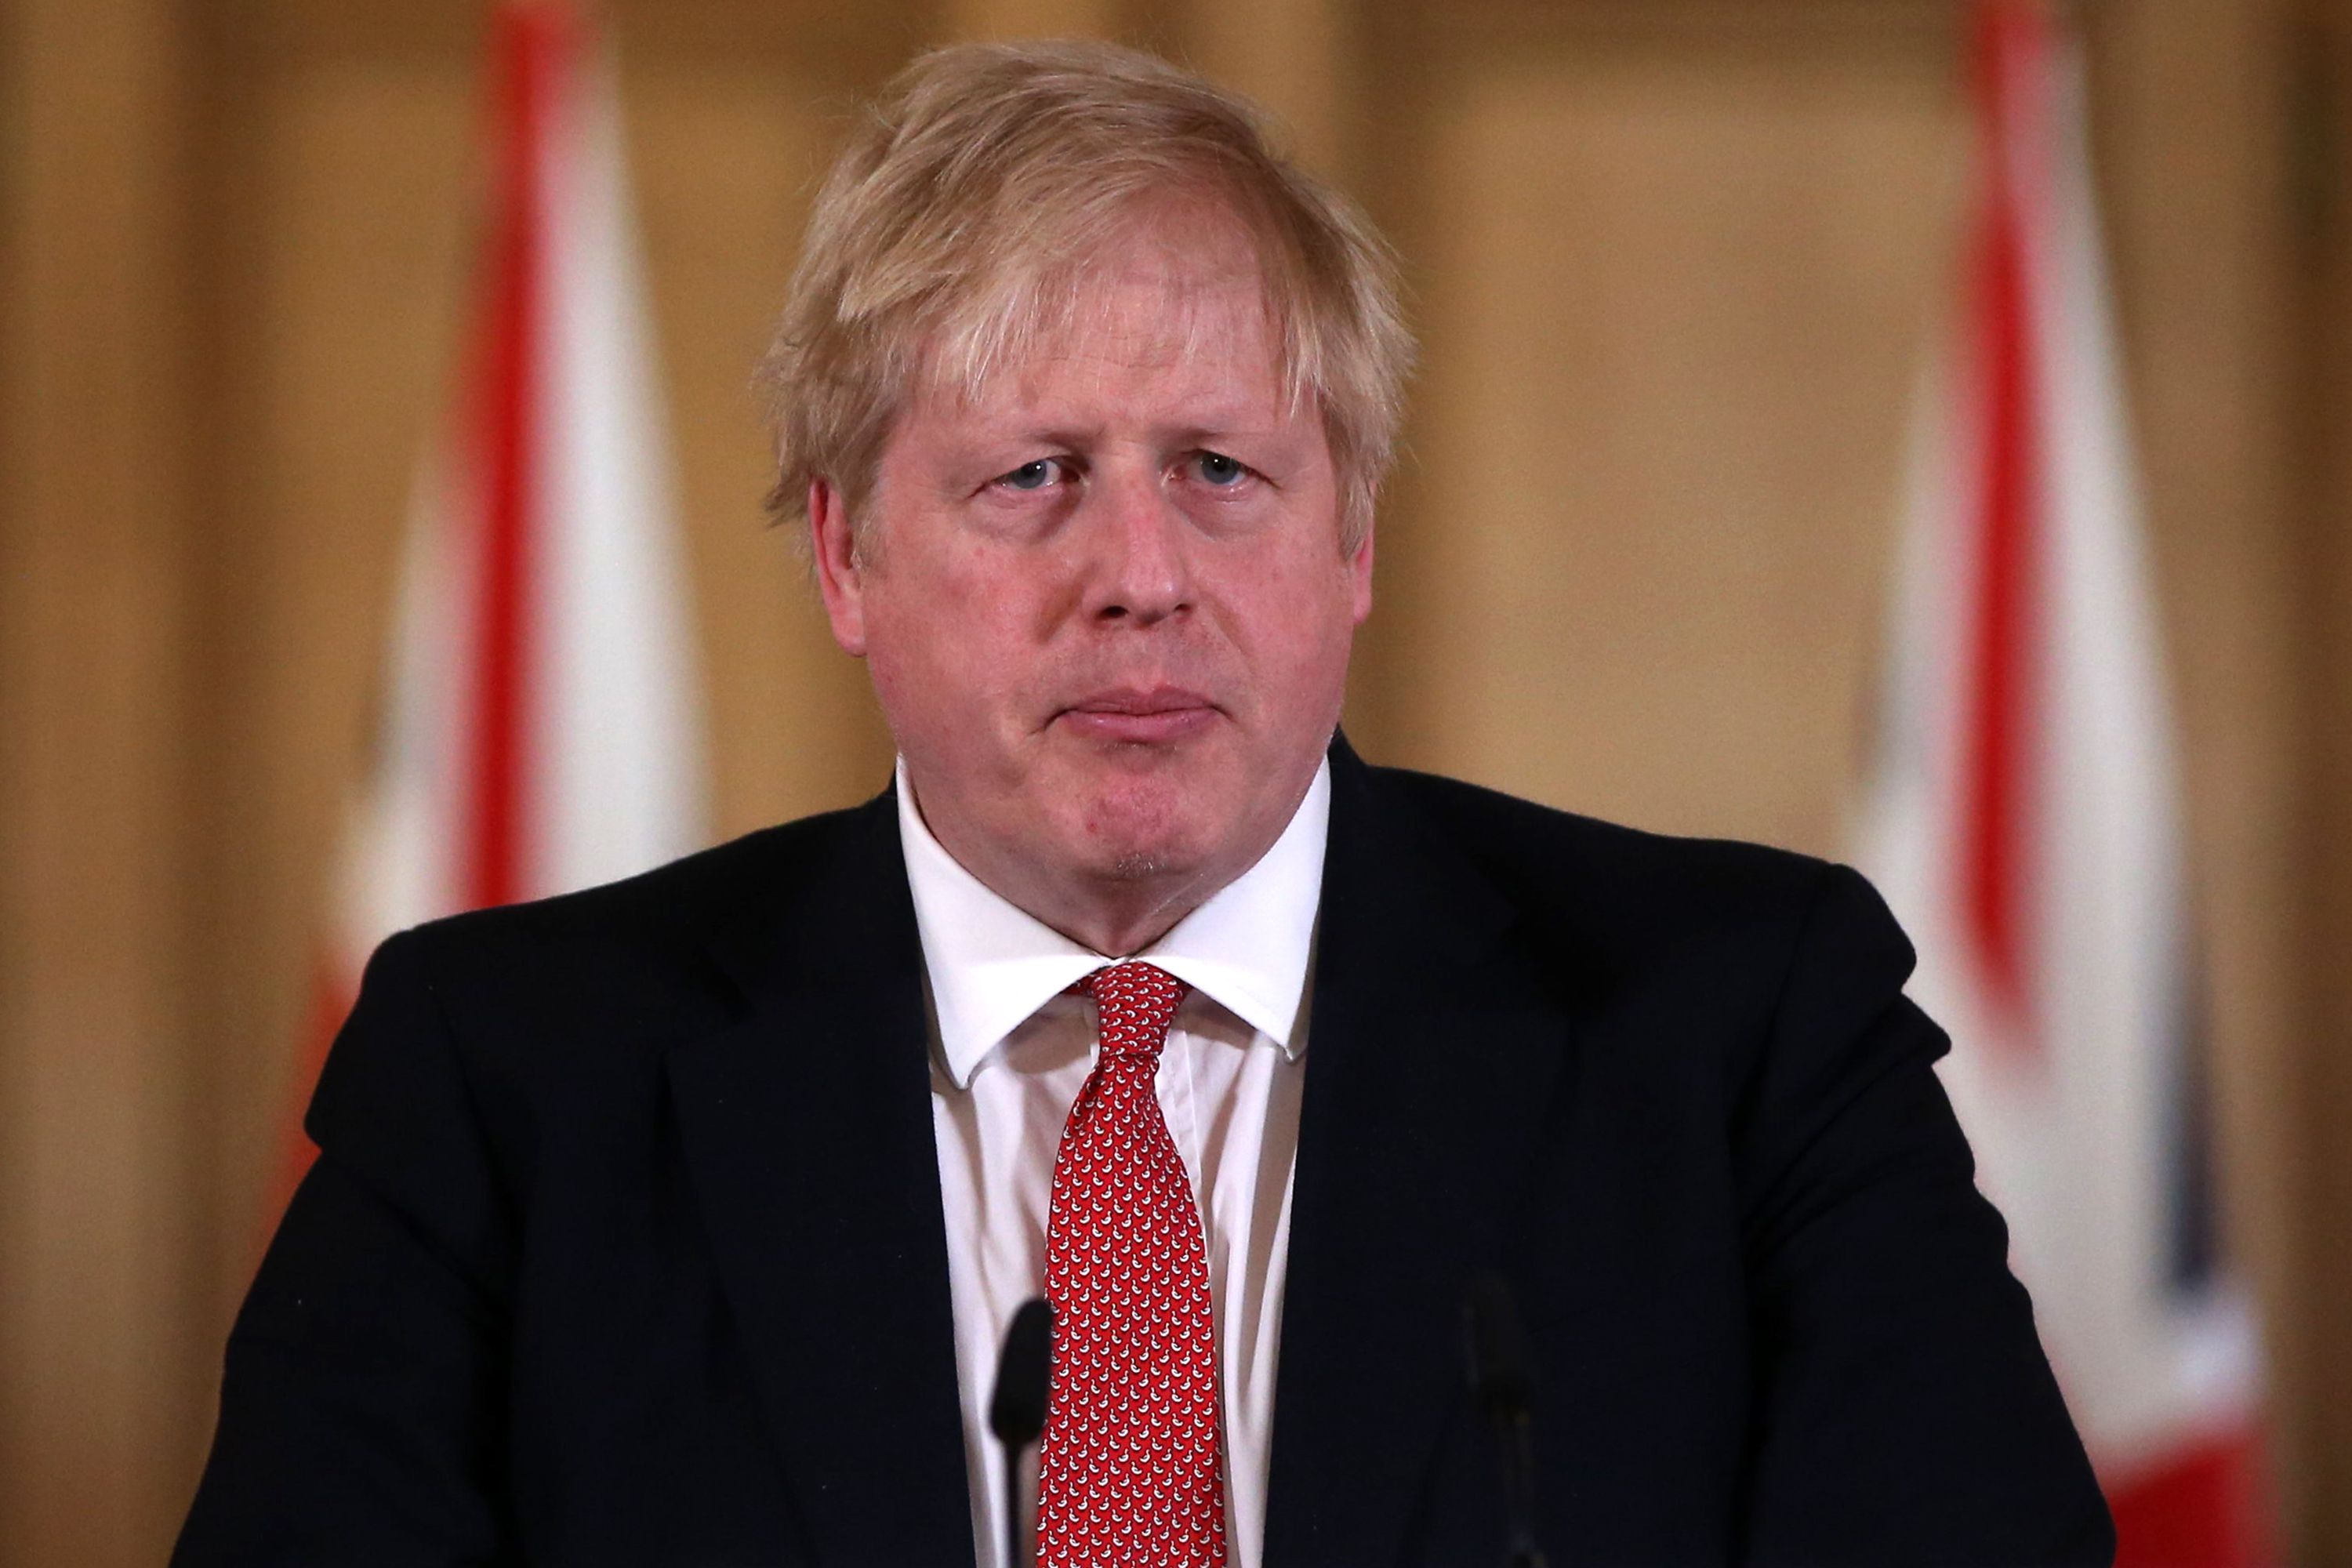 British Prime Minister Boris Johnson speaks about the government's response to the novel coronavirus outbreak during a news conference at 10 Downing Street on March 22.